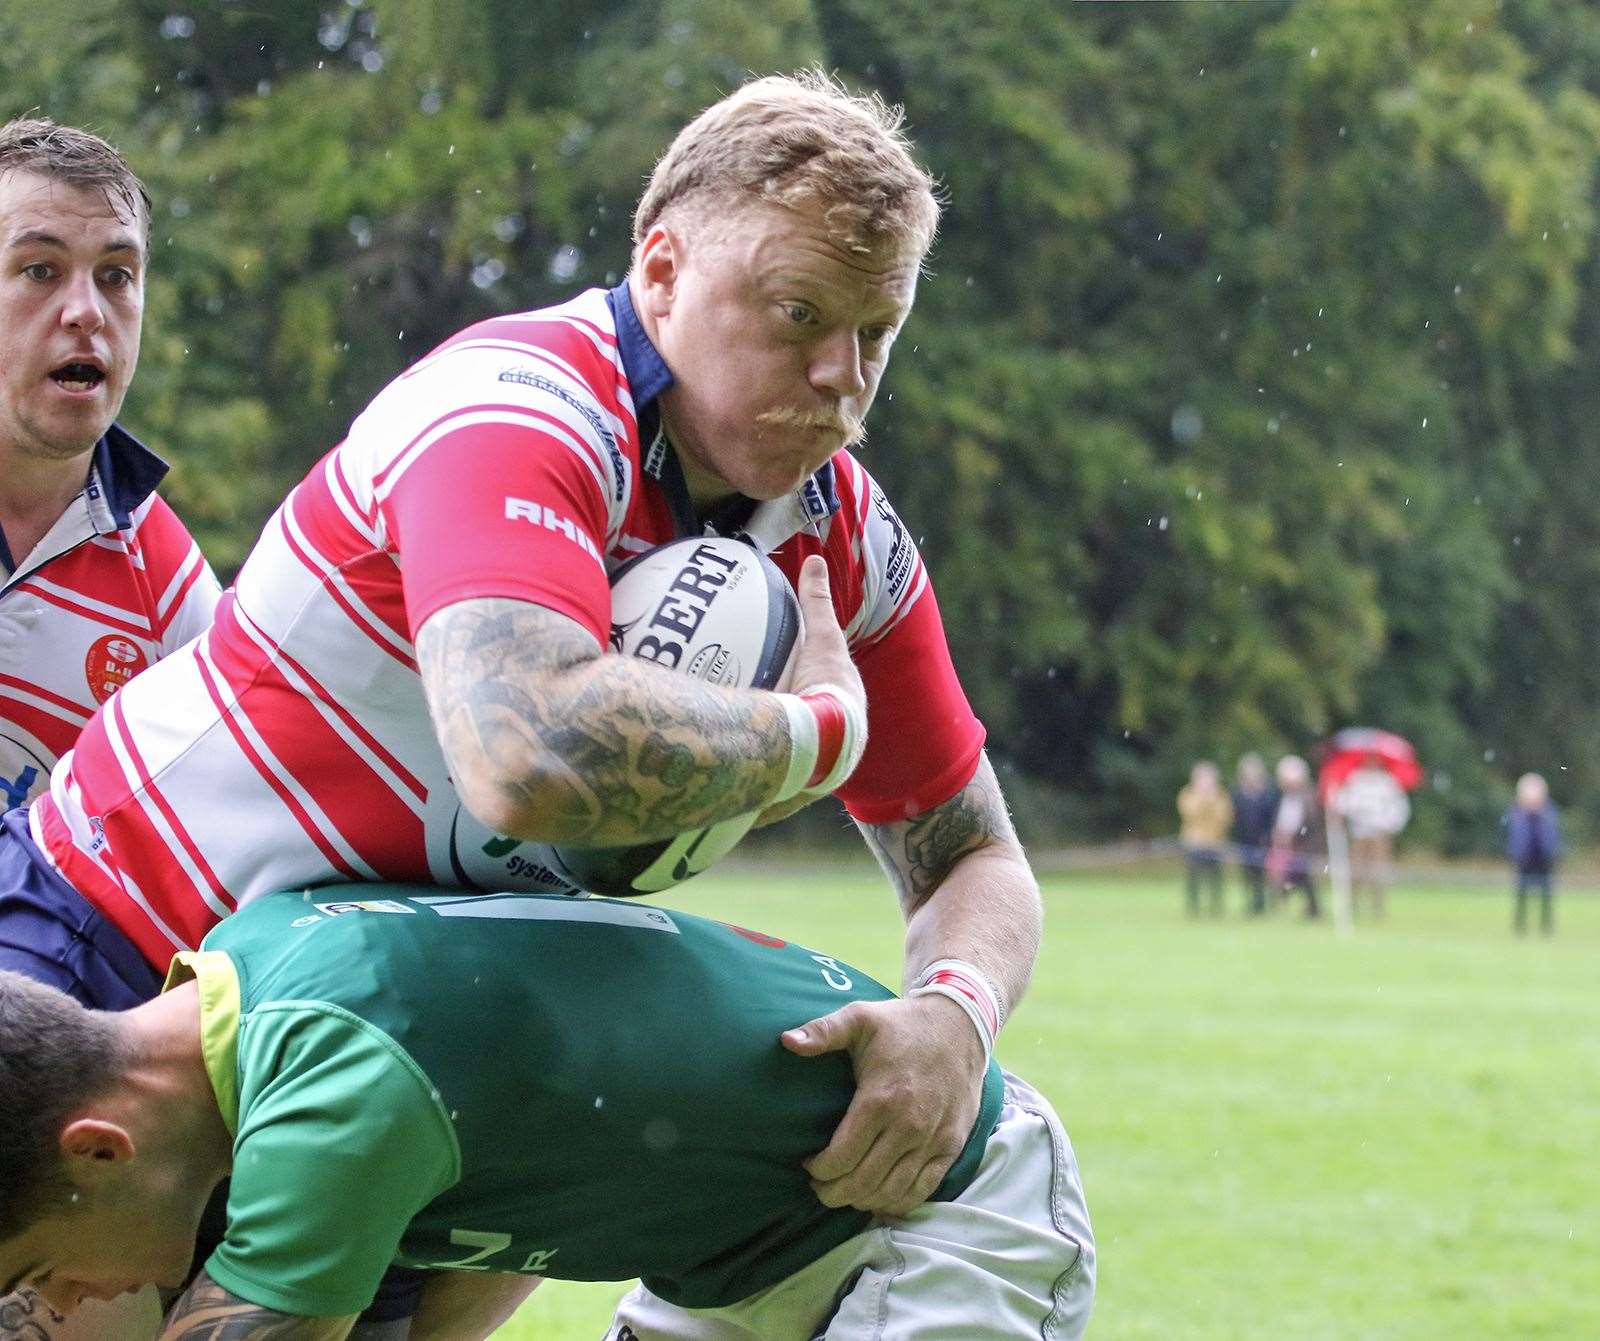 Lewis Scott being tackled, Cameron Hughes in background. Picture: John MacGregor